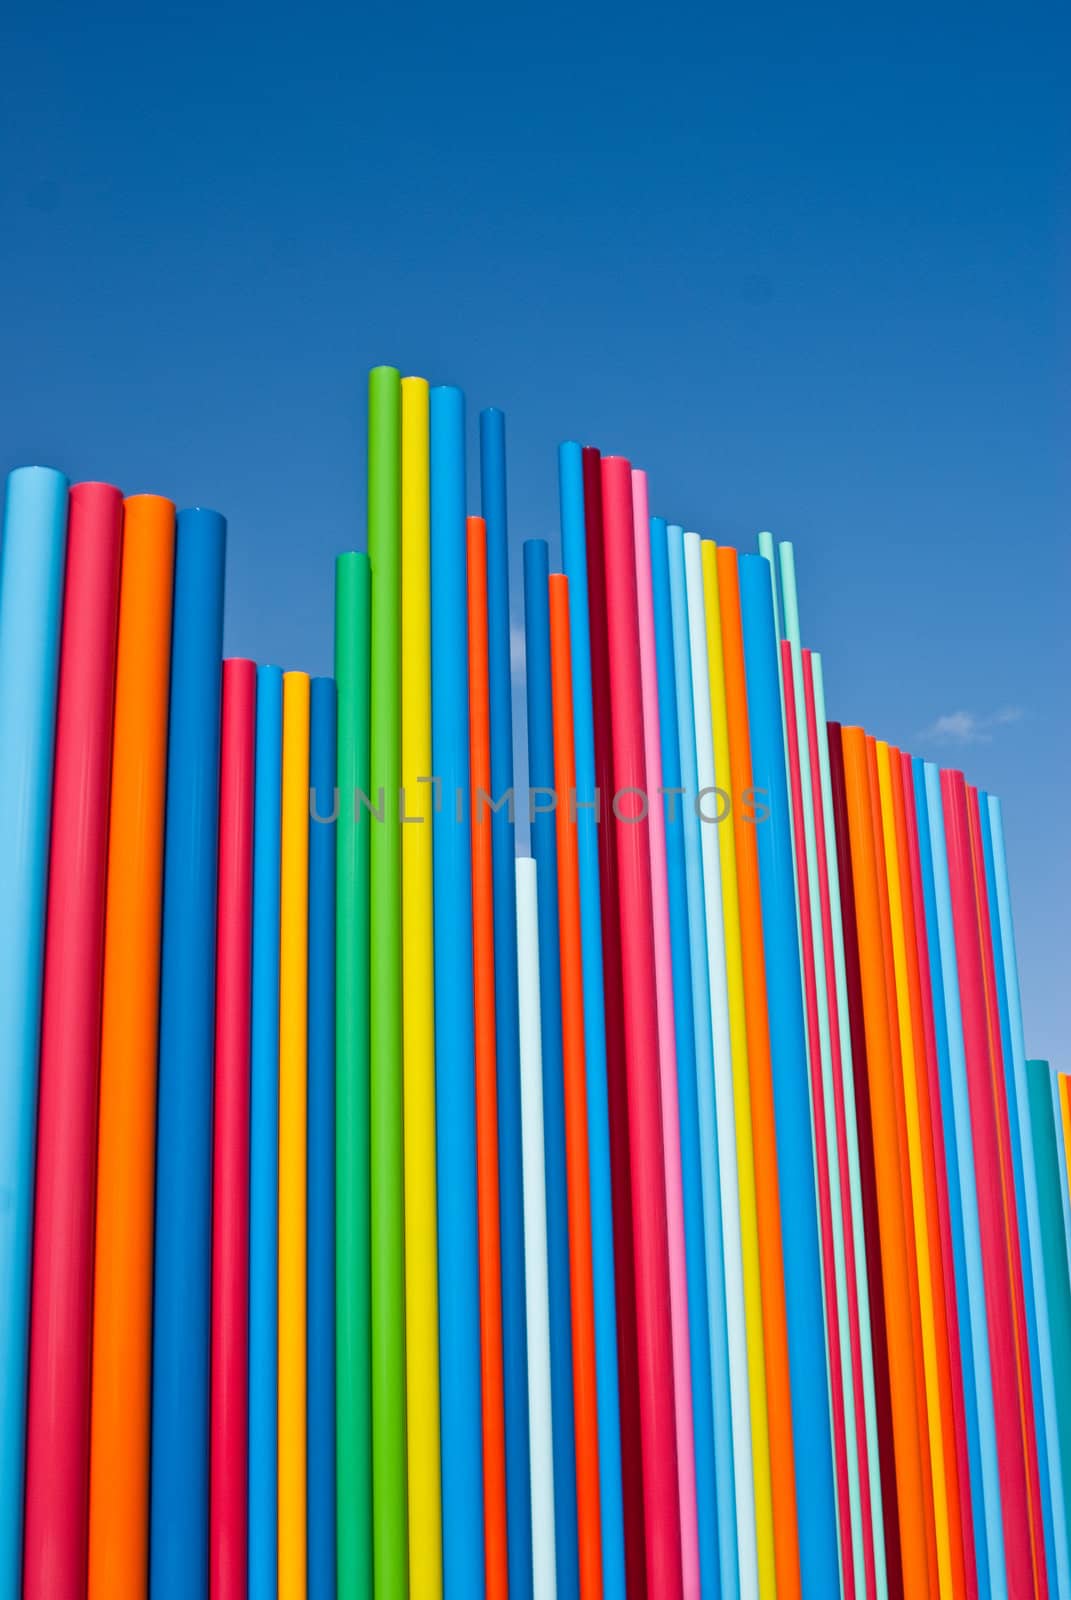 Shining poles of primary colors against the blue sky